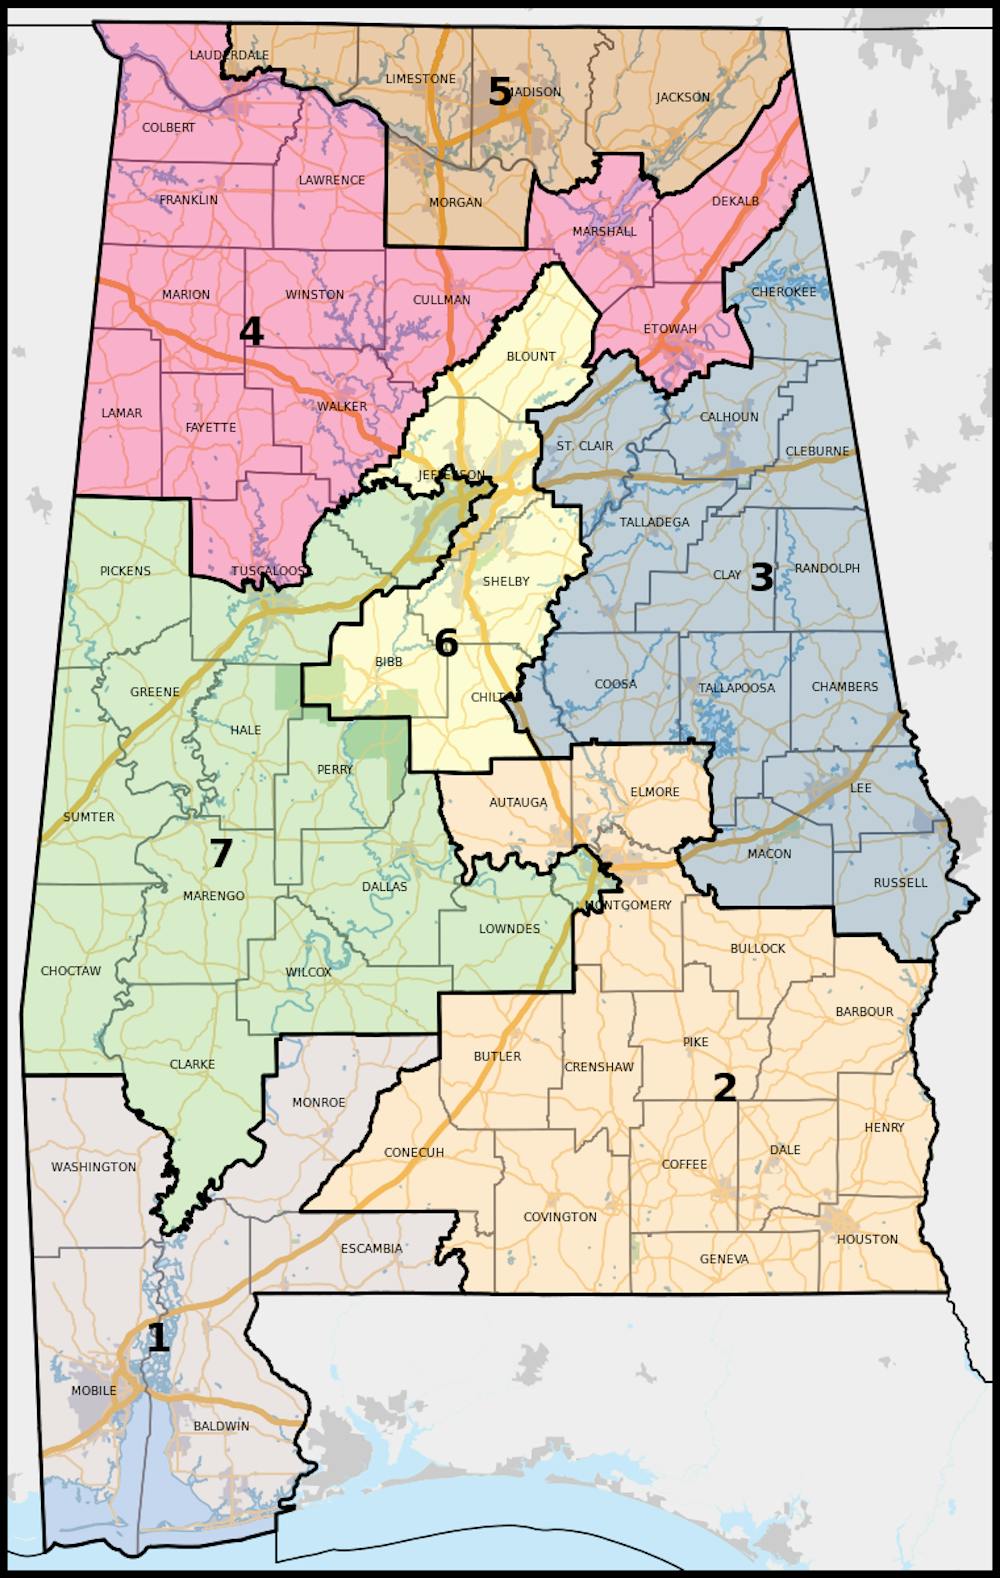 Alabama releases revised congressional map, federal judges reject it